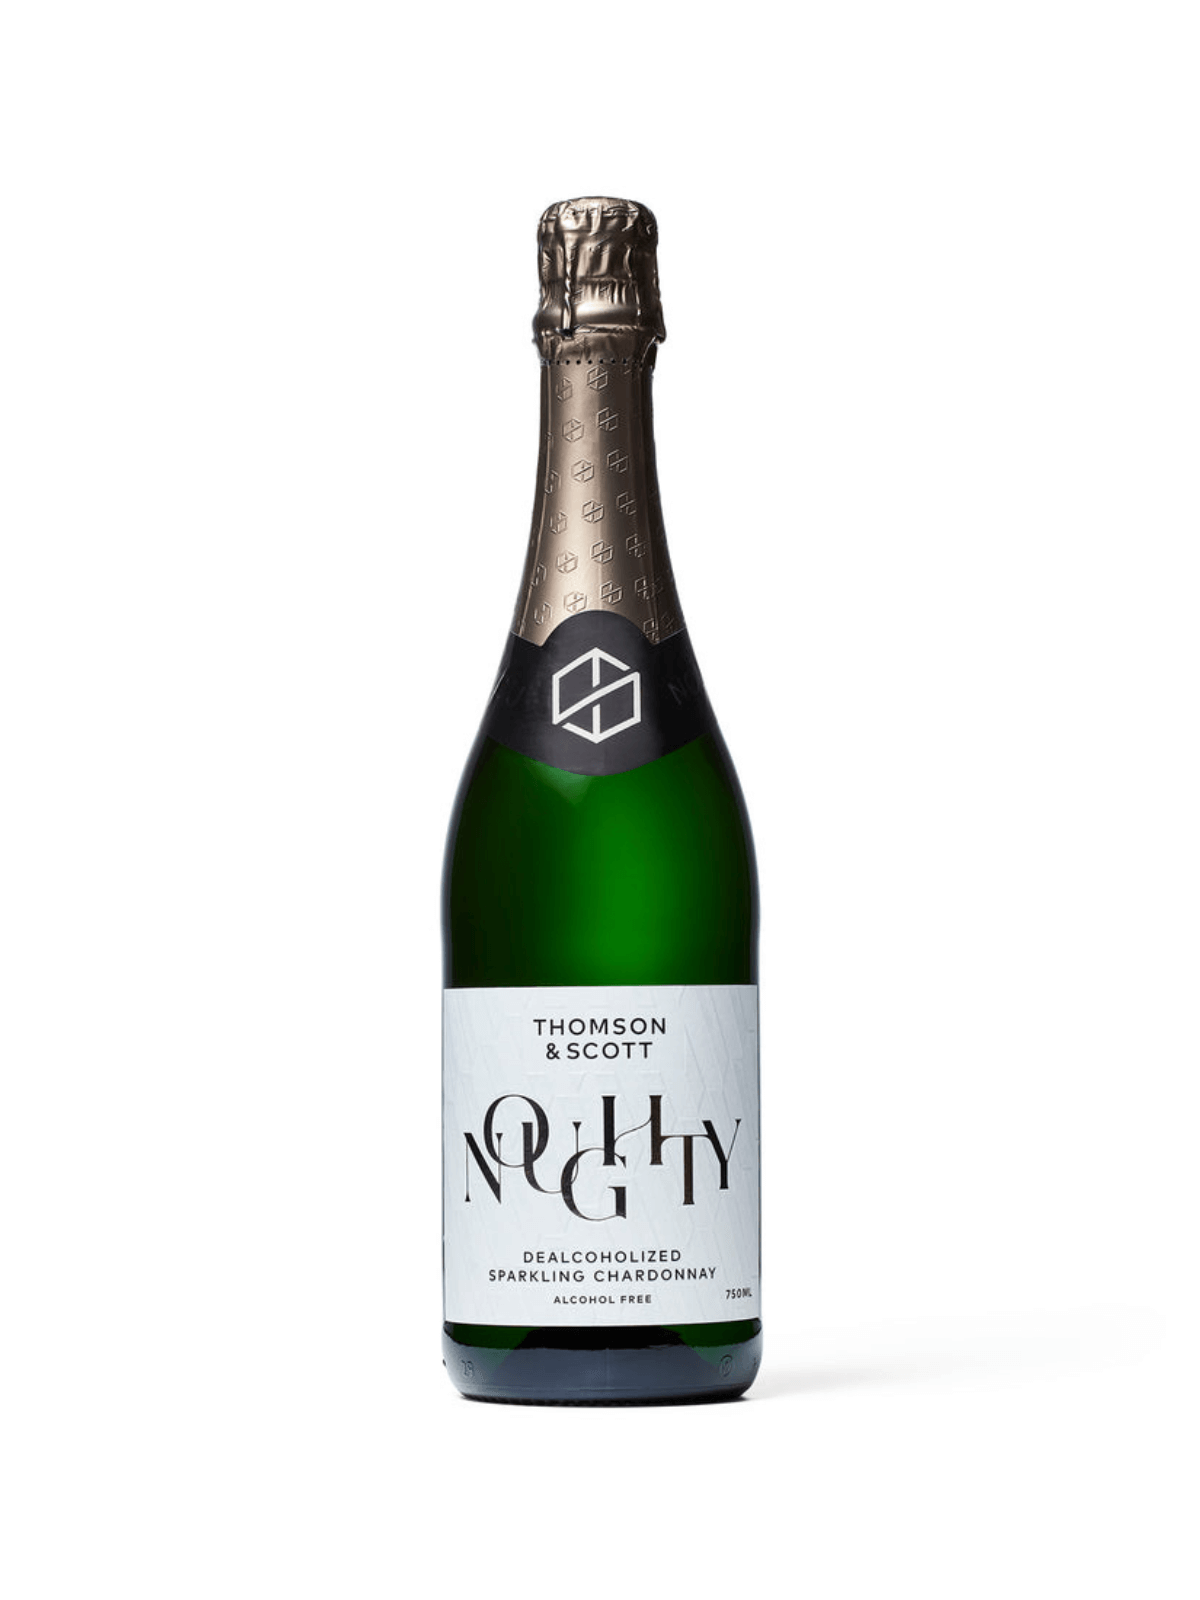 bottle of Noughty alcohol-free sparkling wine with a white label, green bottle and silver cap.